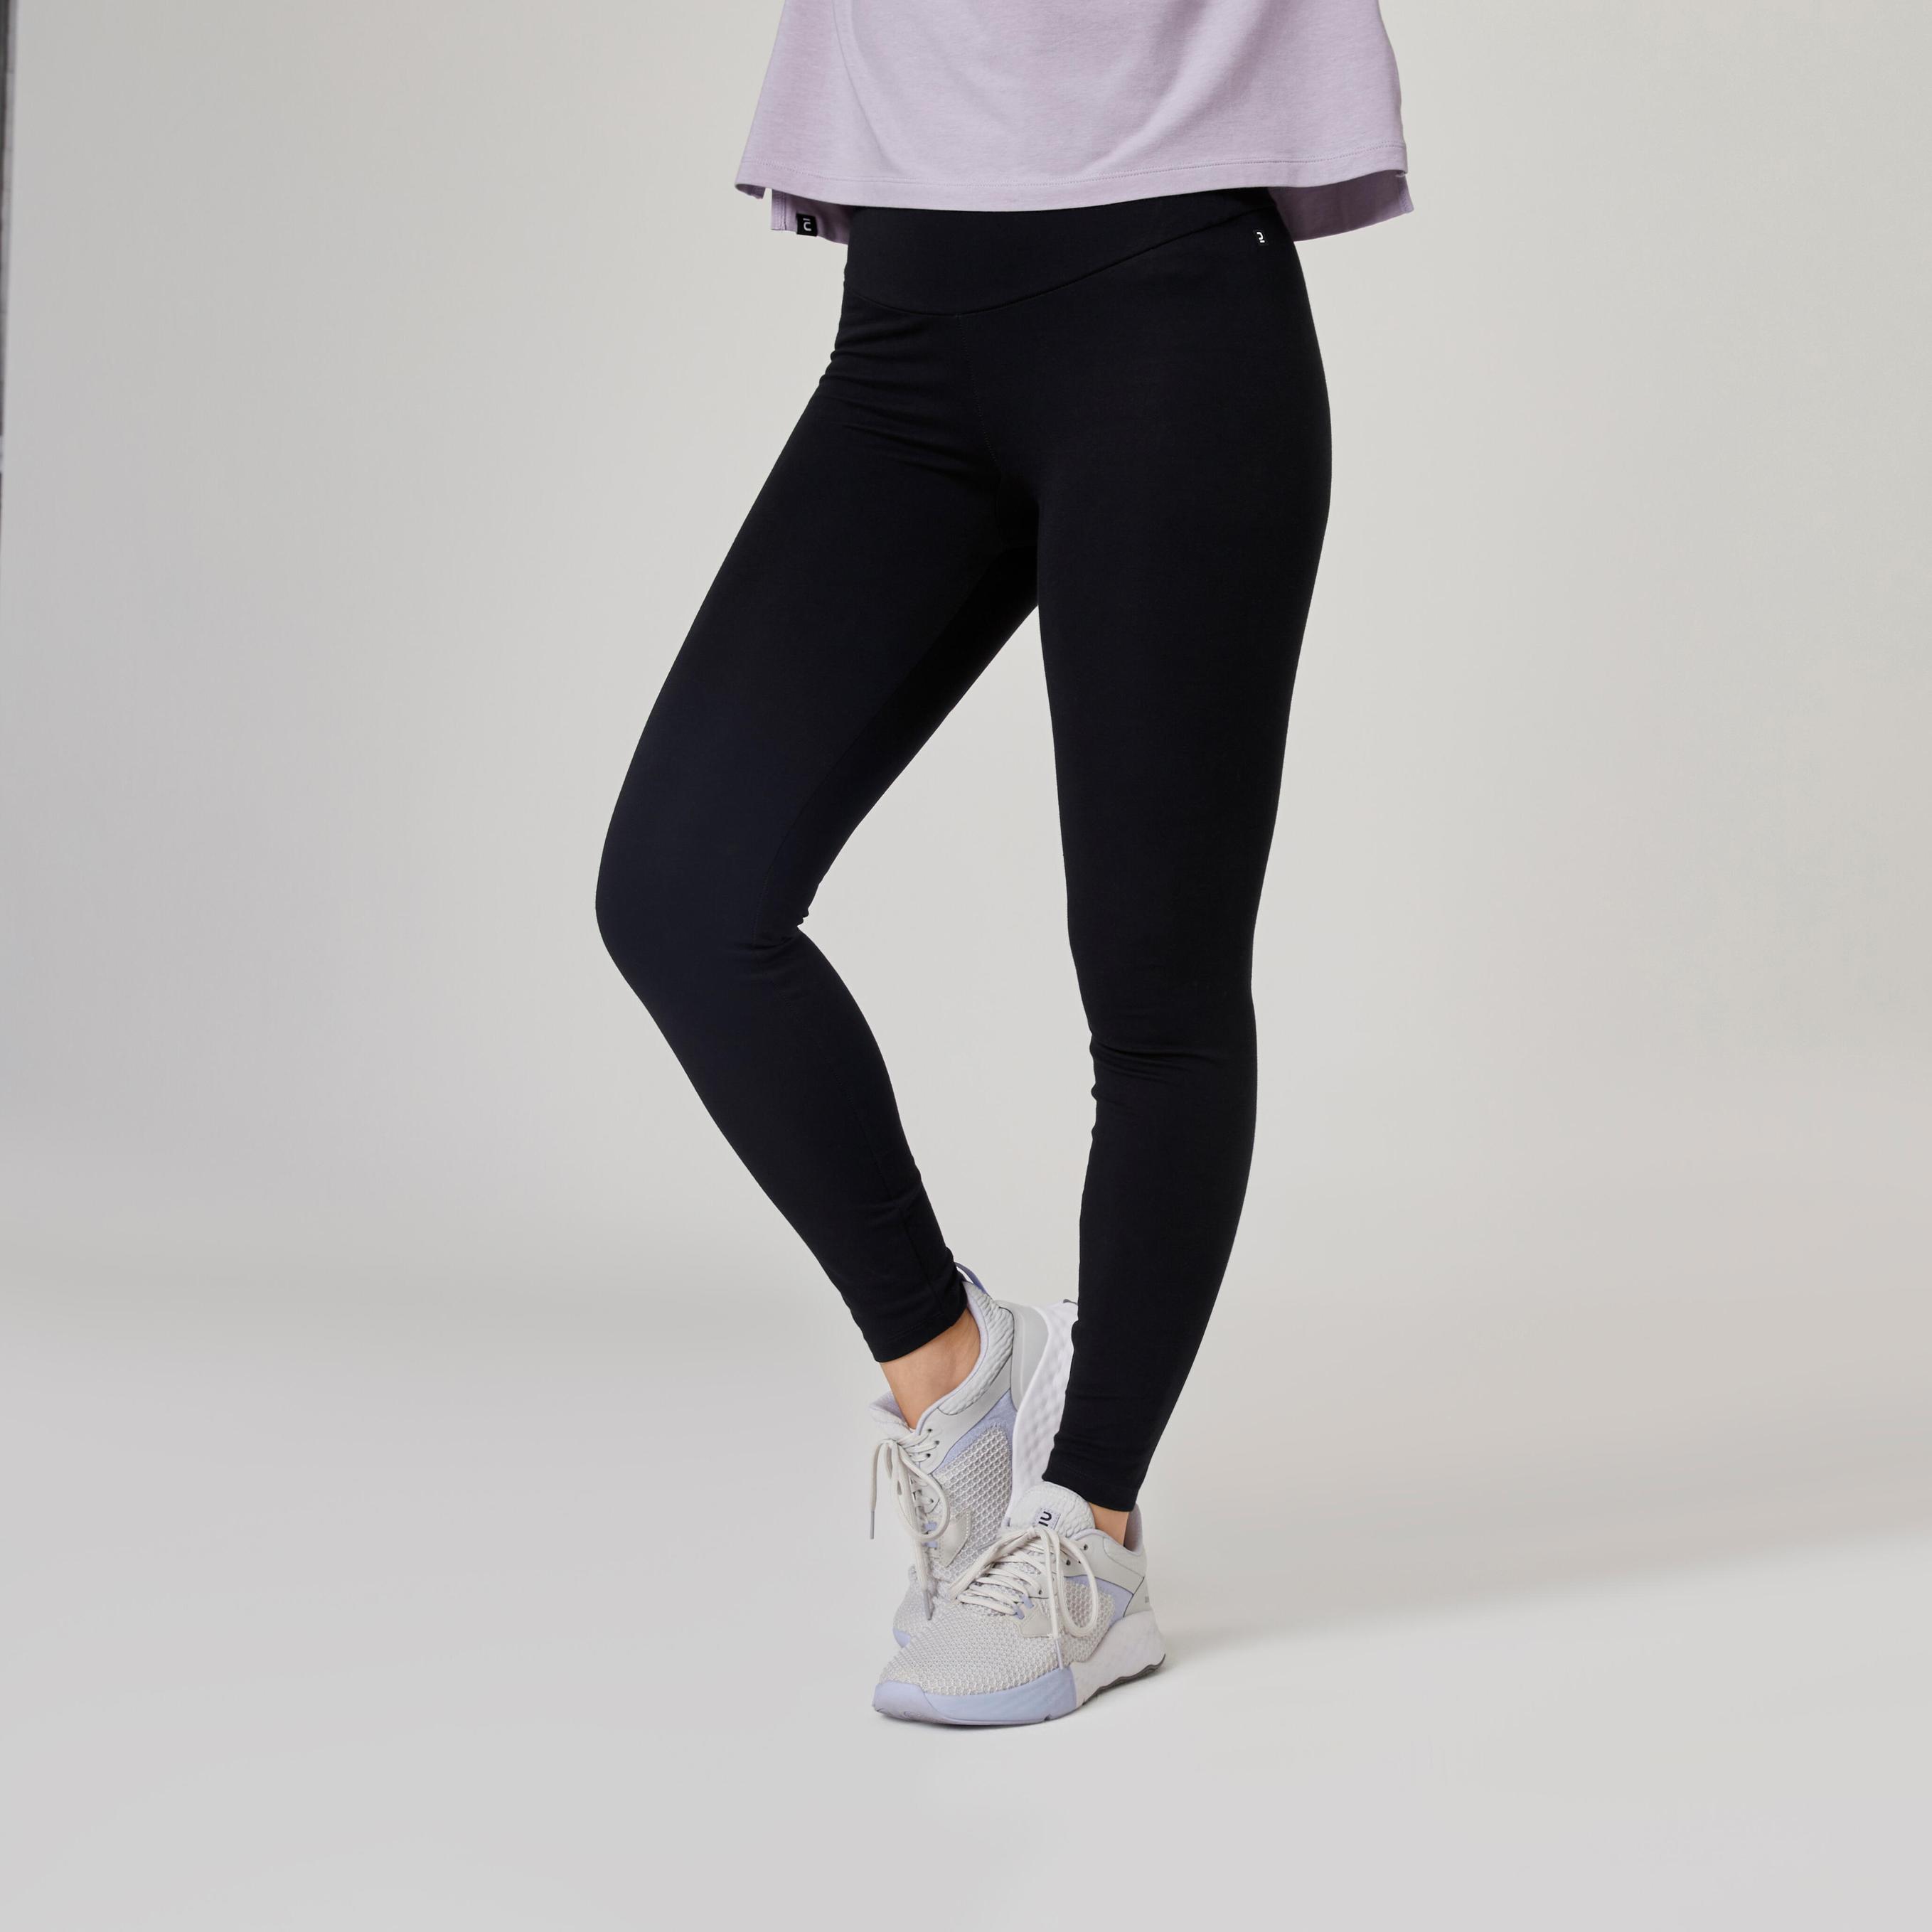 Women's Shaping Cotton Leggings - Black offers at S$ 16.9 in Decathlon